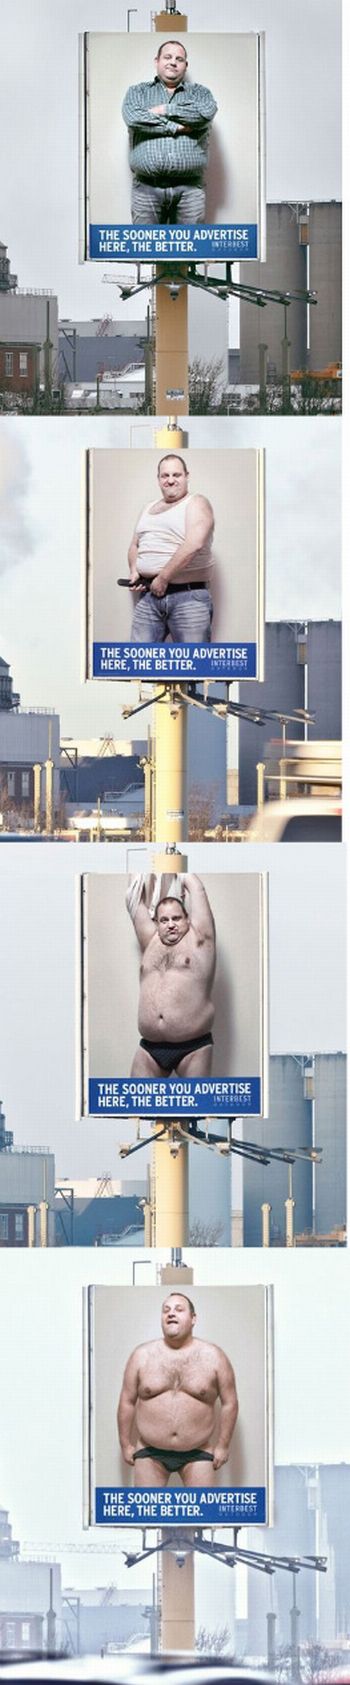 Truth in advertizing, or just a little blackmail to sell that billboard space?